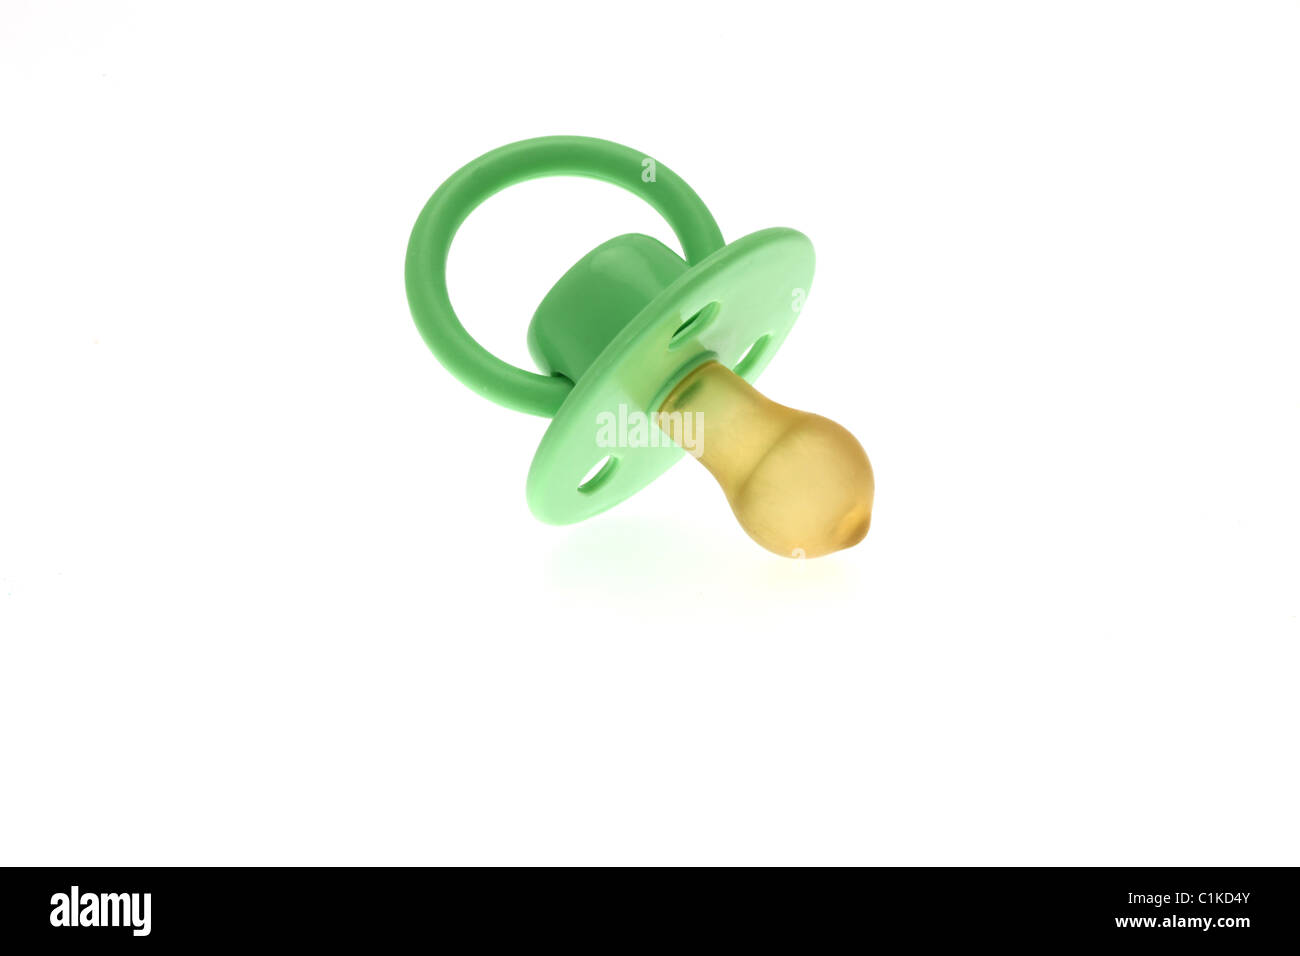 High key image of a traditional infants green dummy or pacifier taken against a white background. Stock Photo